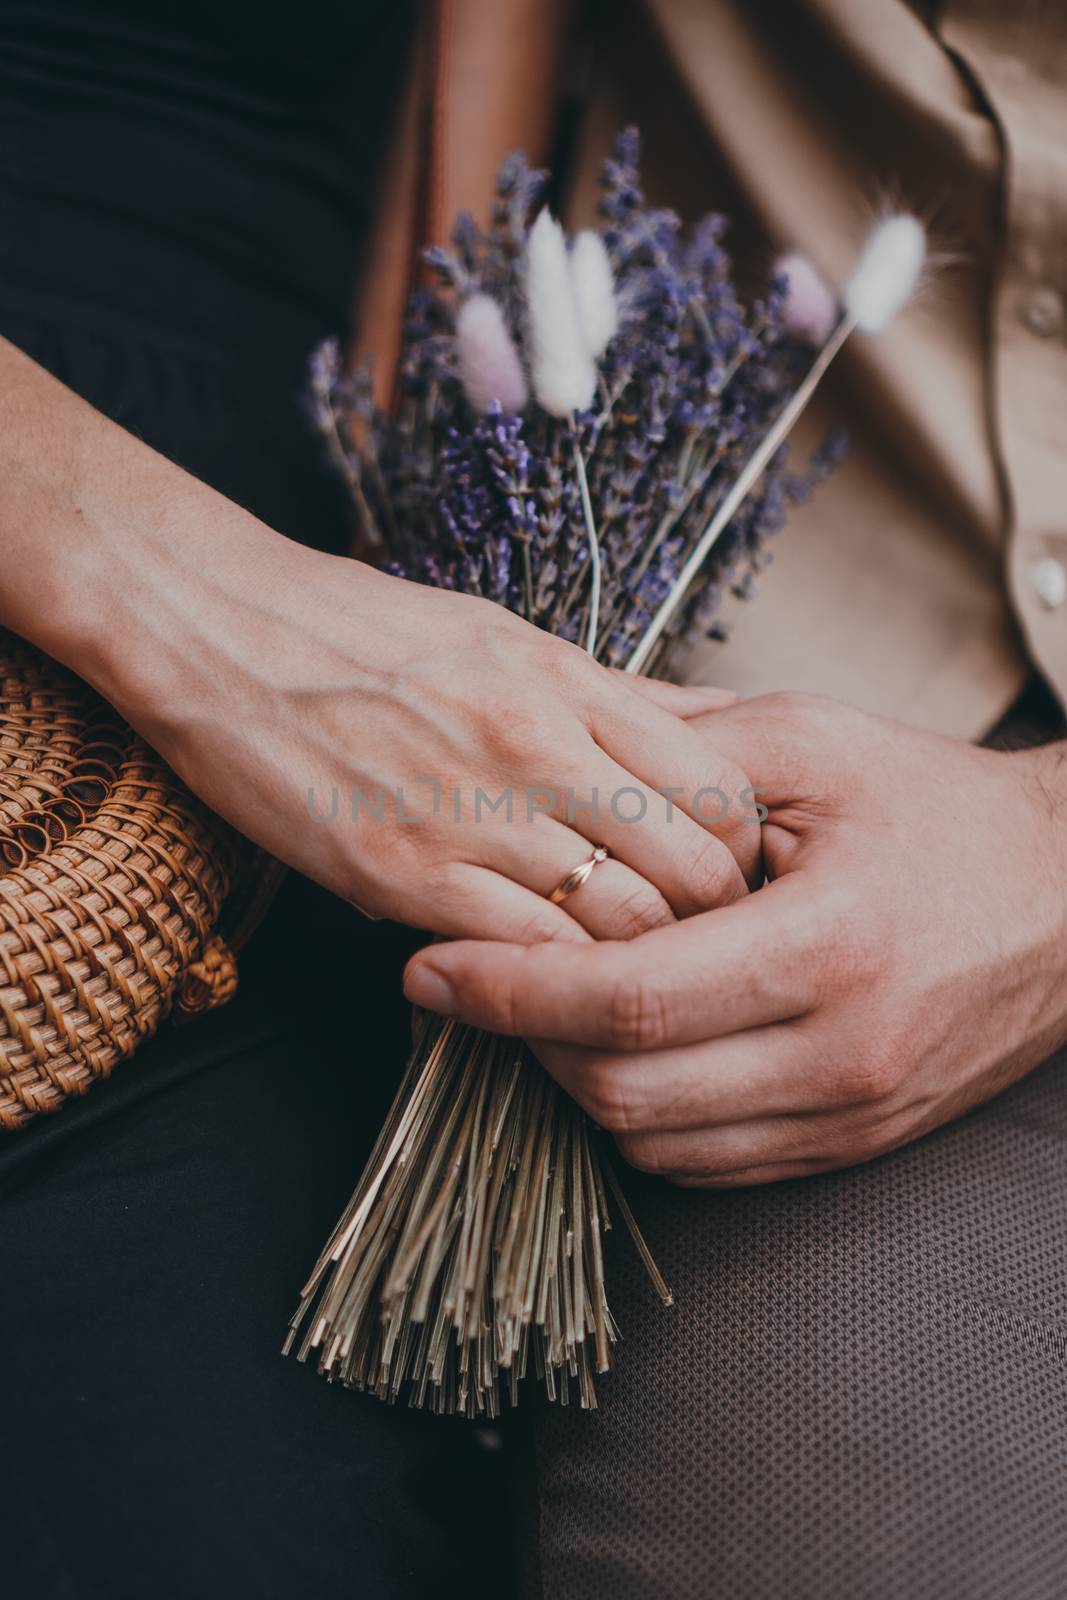 Bouquet of lavender flowers in girls hands. Engagement ring on hand. Love couple holding hands. Love, relationships, travel, romance concept.